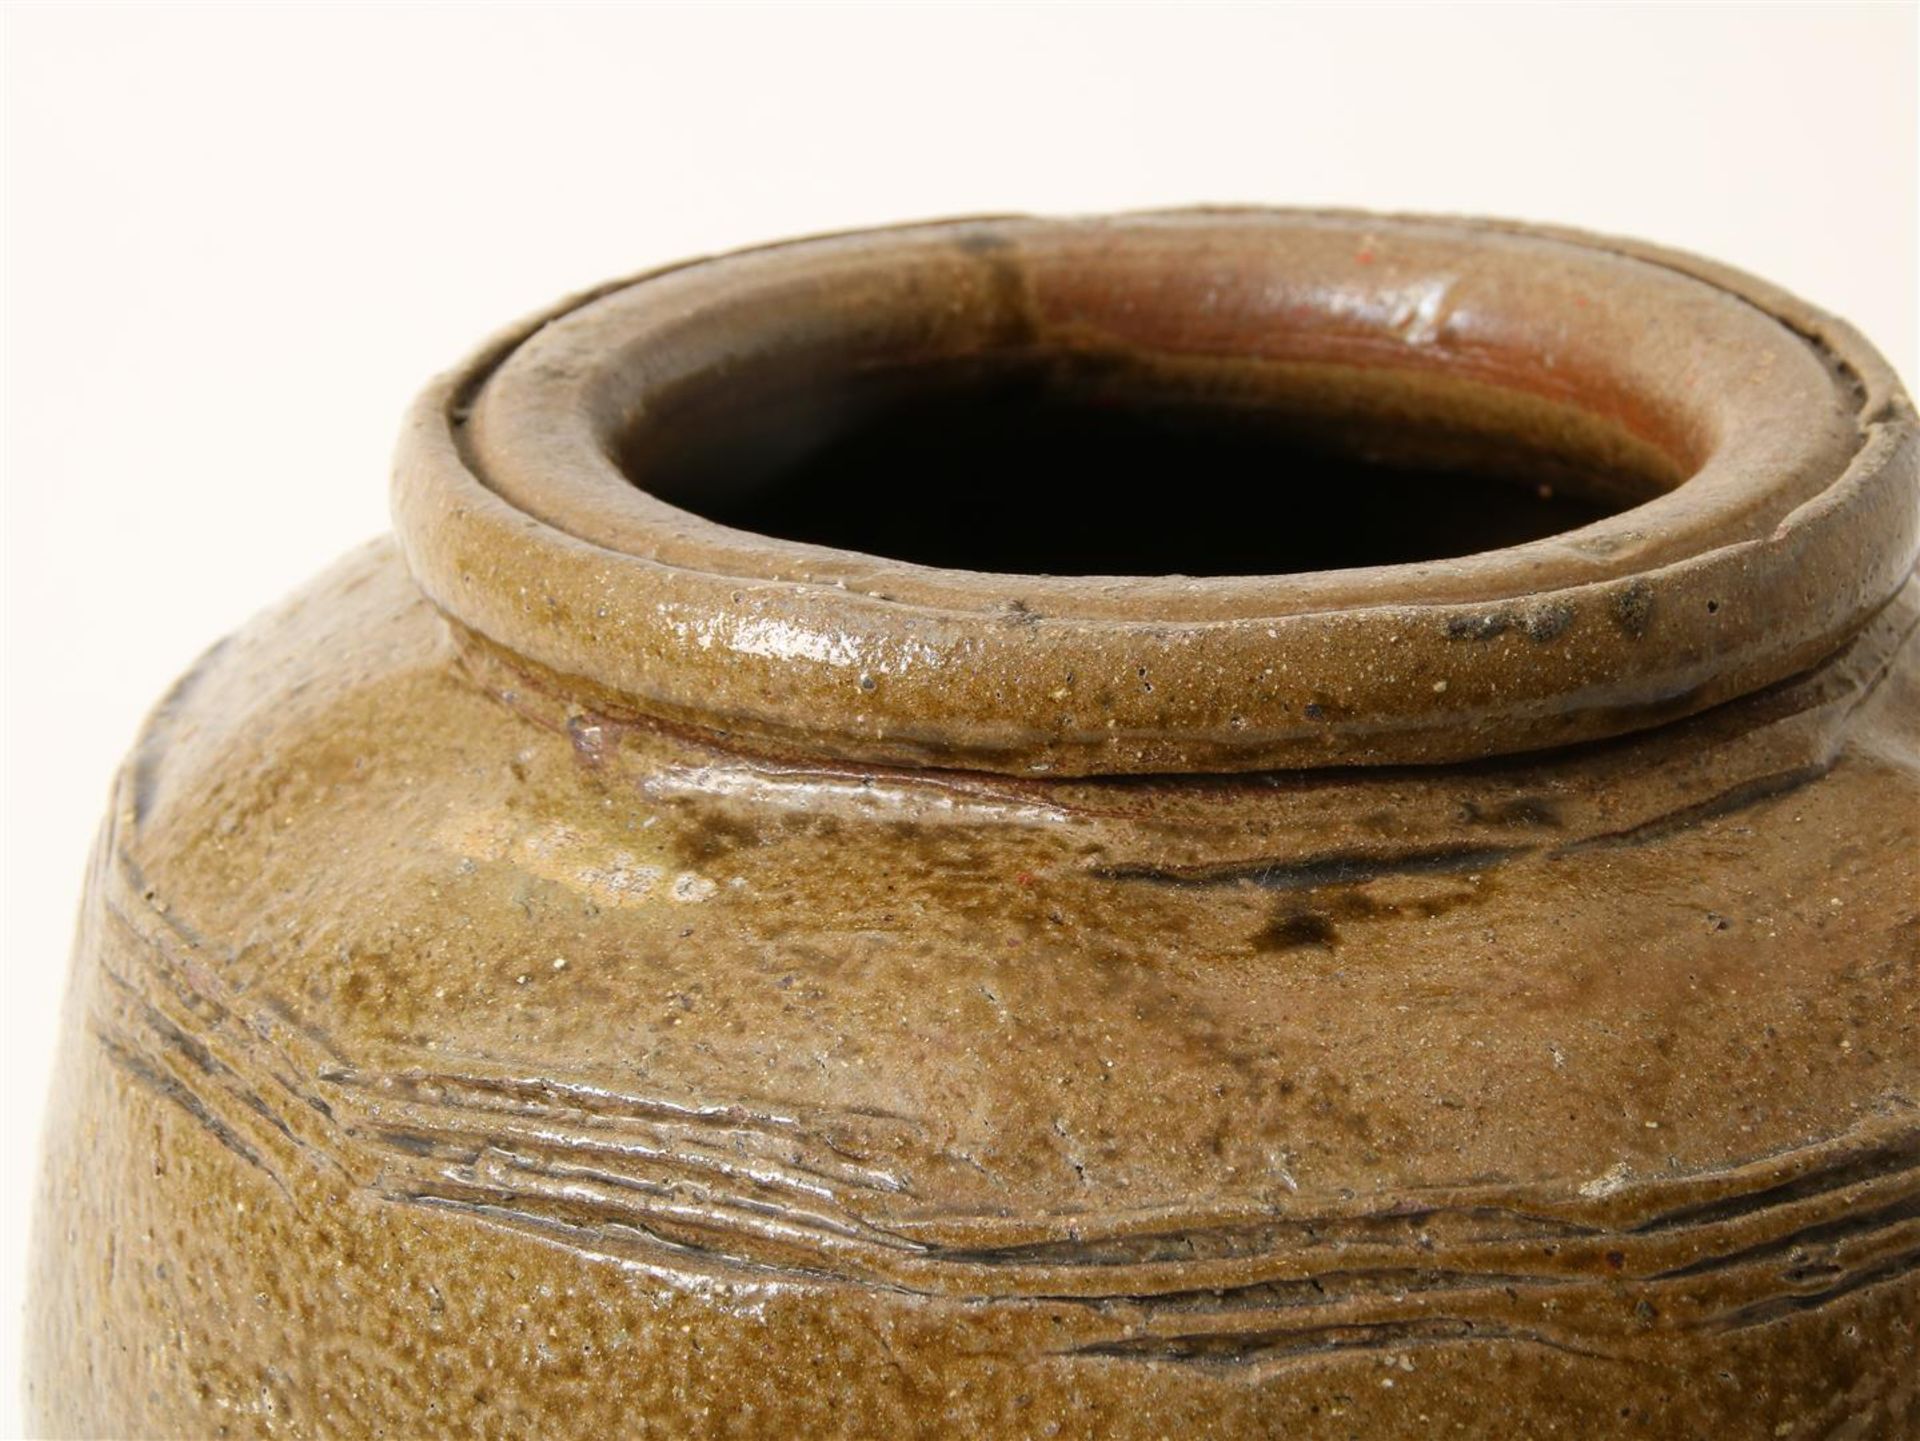 Large-format Shiwan earthenware storage jar, barrel-shaped with brown glaze and an incised band - Image 2 of 3